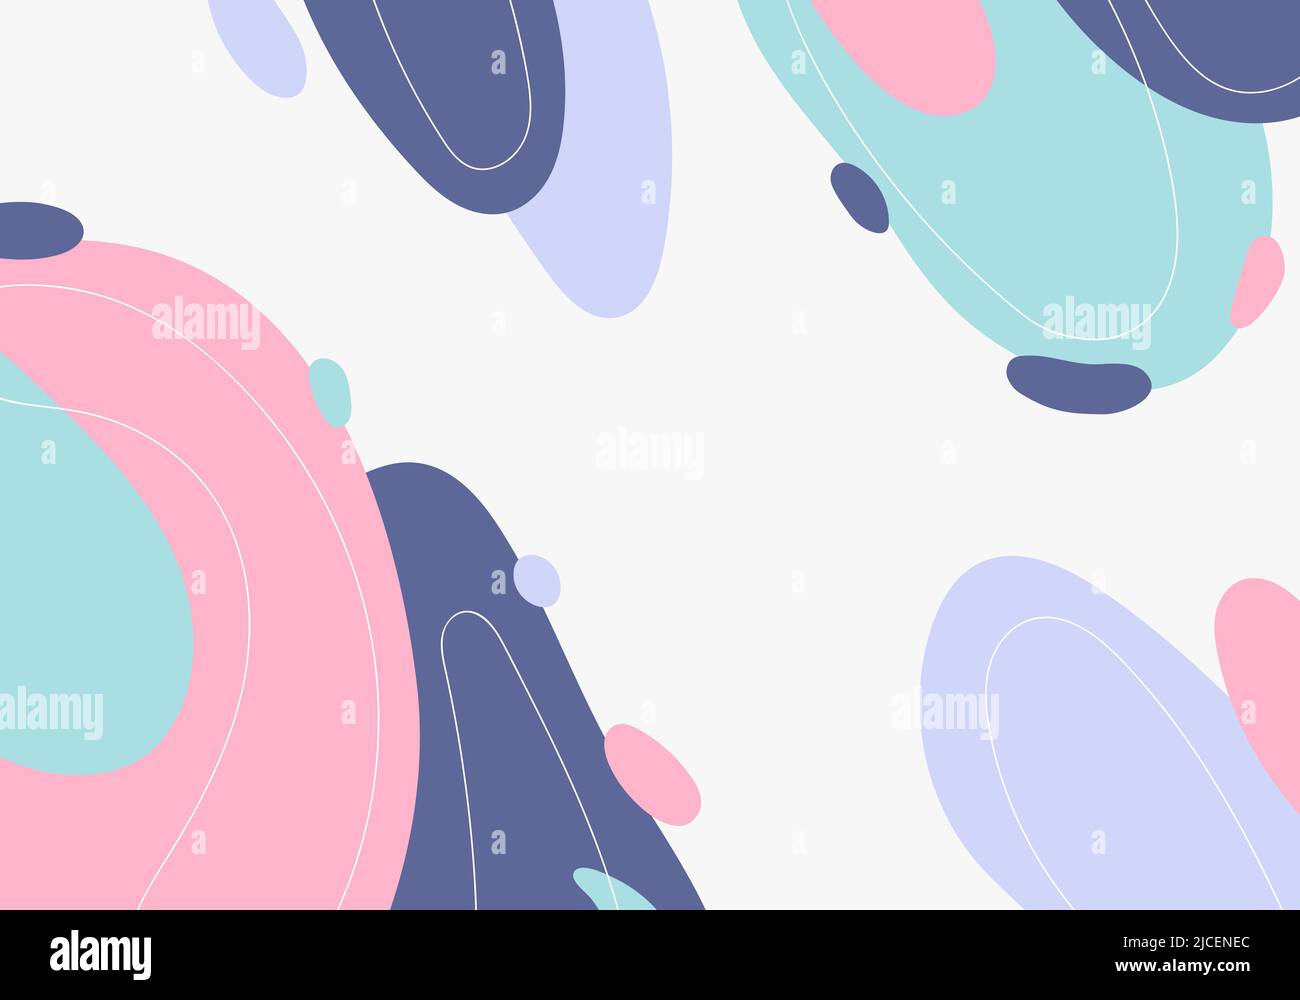 Abstract doodle design artwork decorative style of minimal. Overlapping style template decorative background. Vector Stock Vector